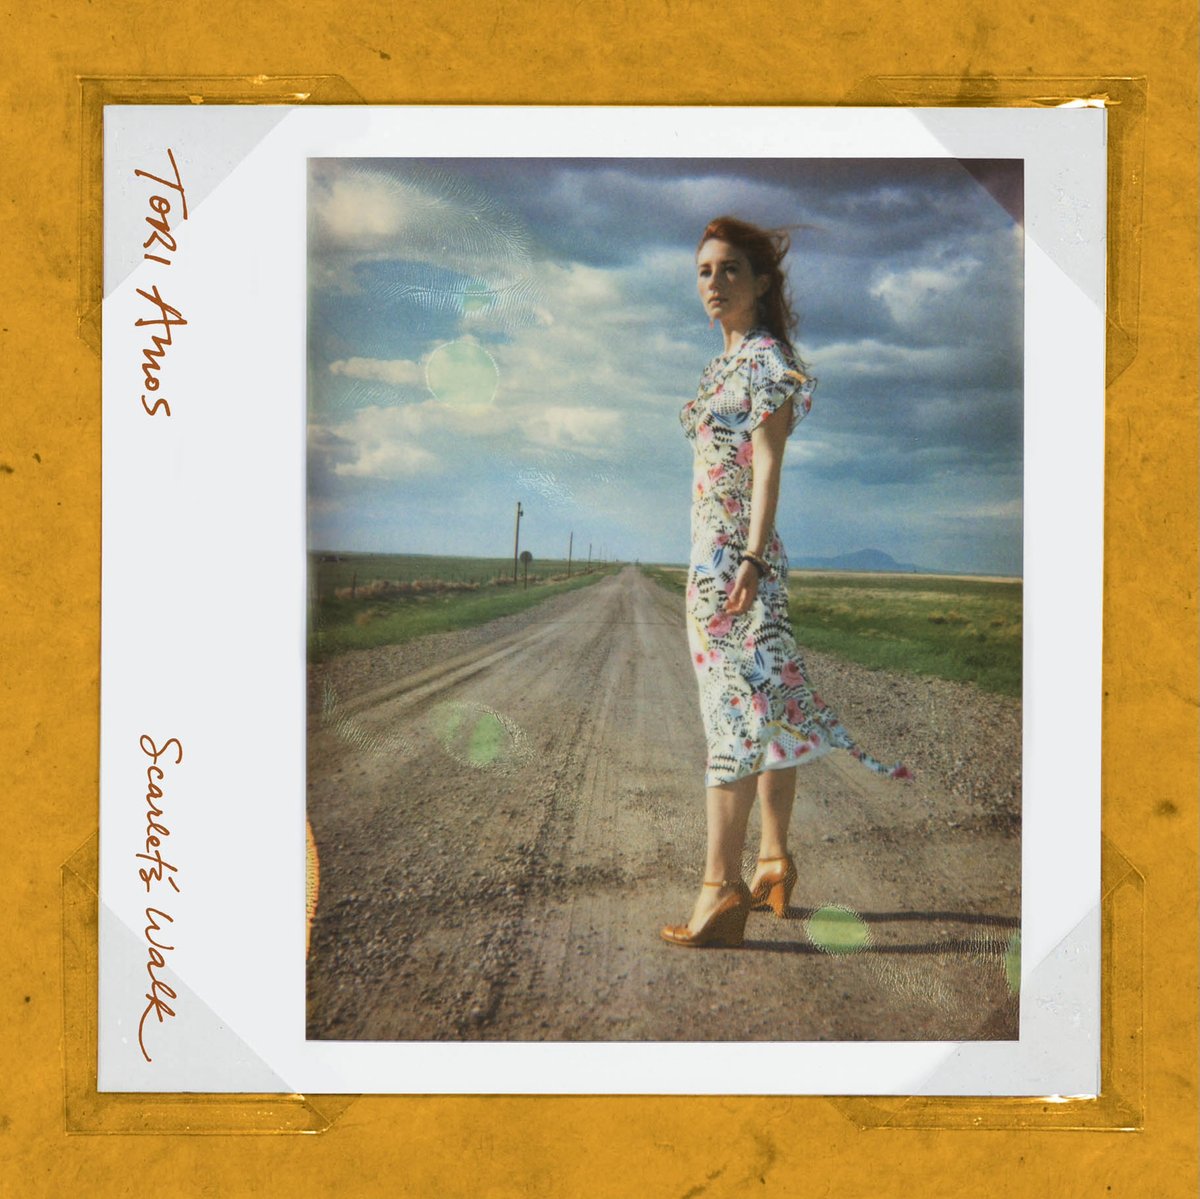 Wow! It was 20 Years ago today when Scarlet’s Walk was released into the world. It seems like yesterday that Scarlet had her walkabout across America post 9/11 and journaled her stories into the songs on this record. What are some of your memories from this record?